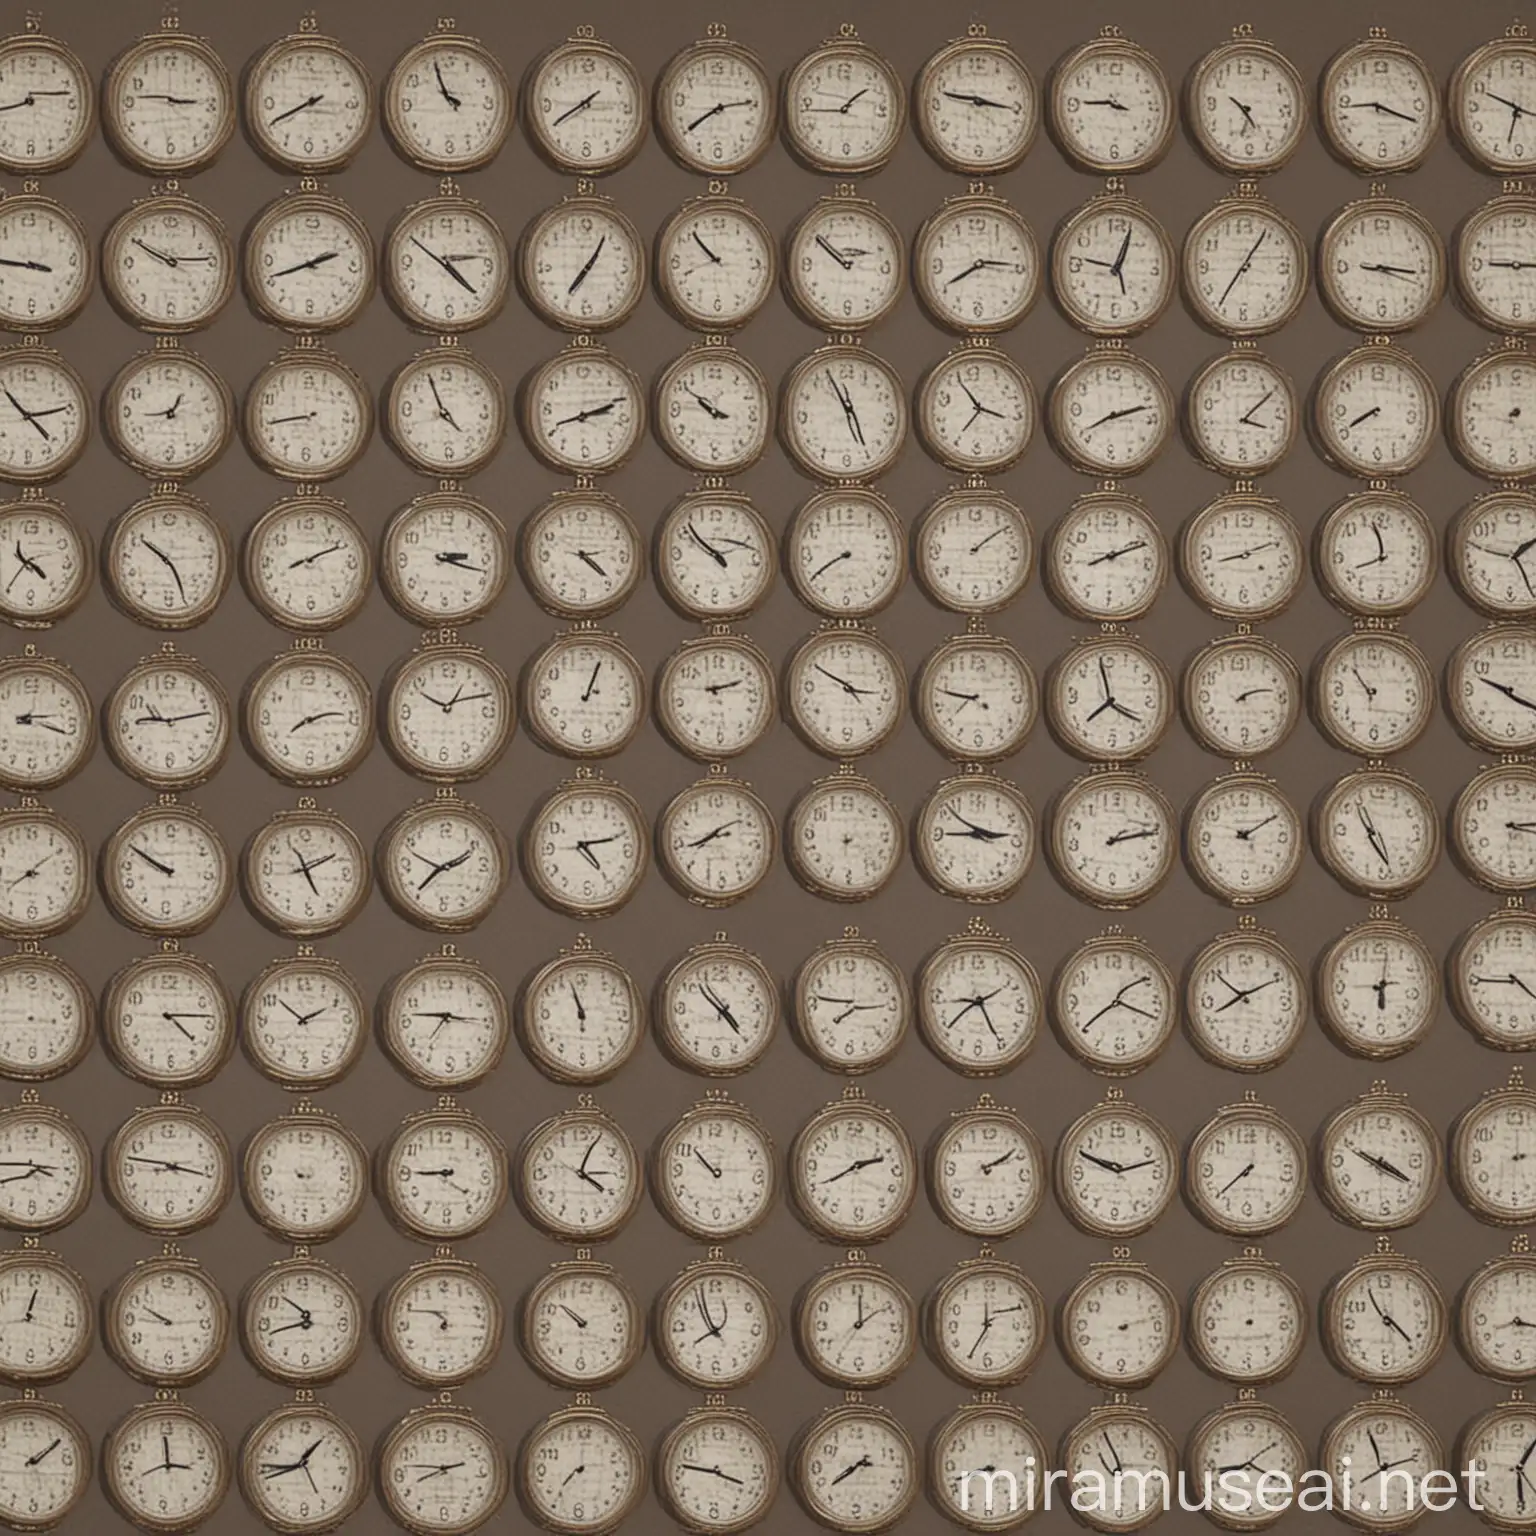 create a 2048 x 1152 pixel picture that is full of clocks